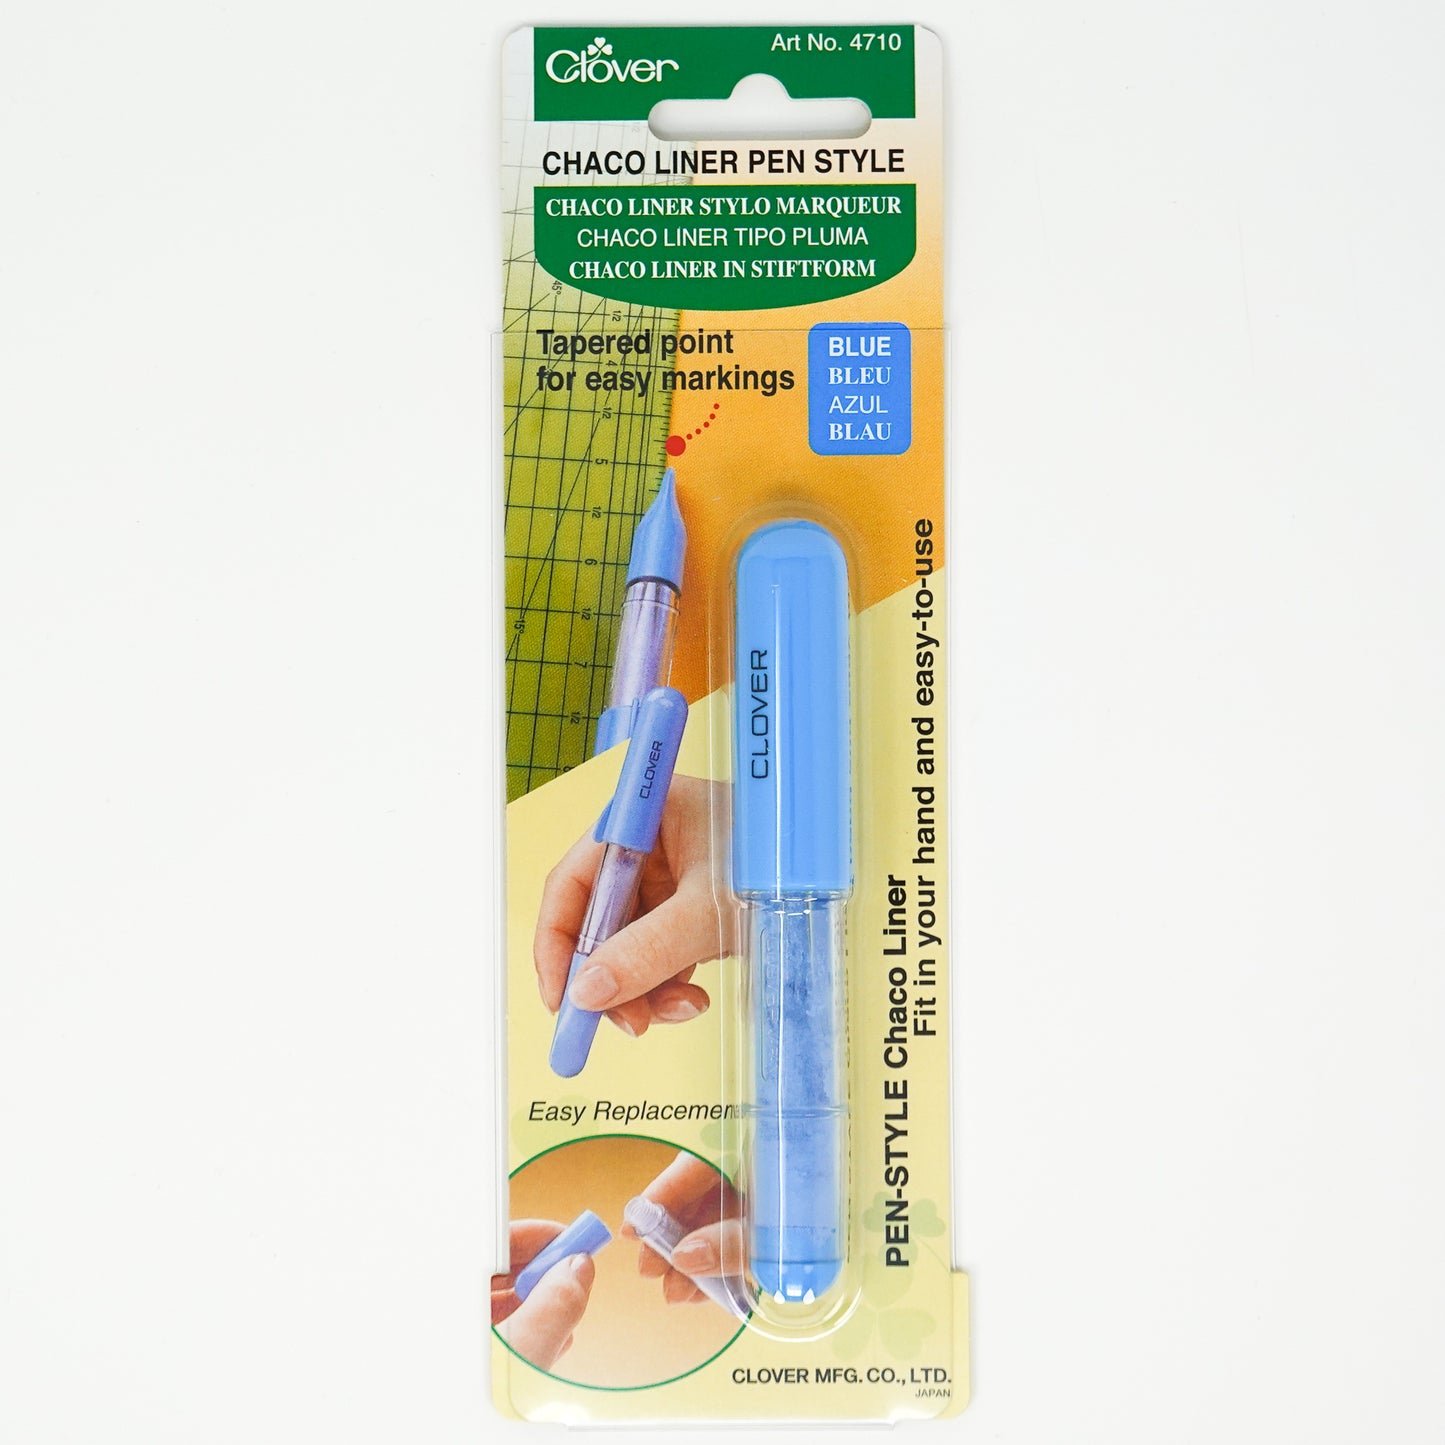 Chaco Liner Pen Style - Blue